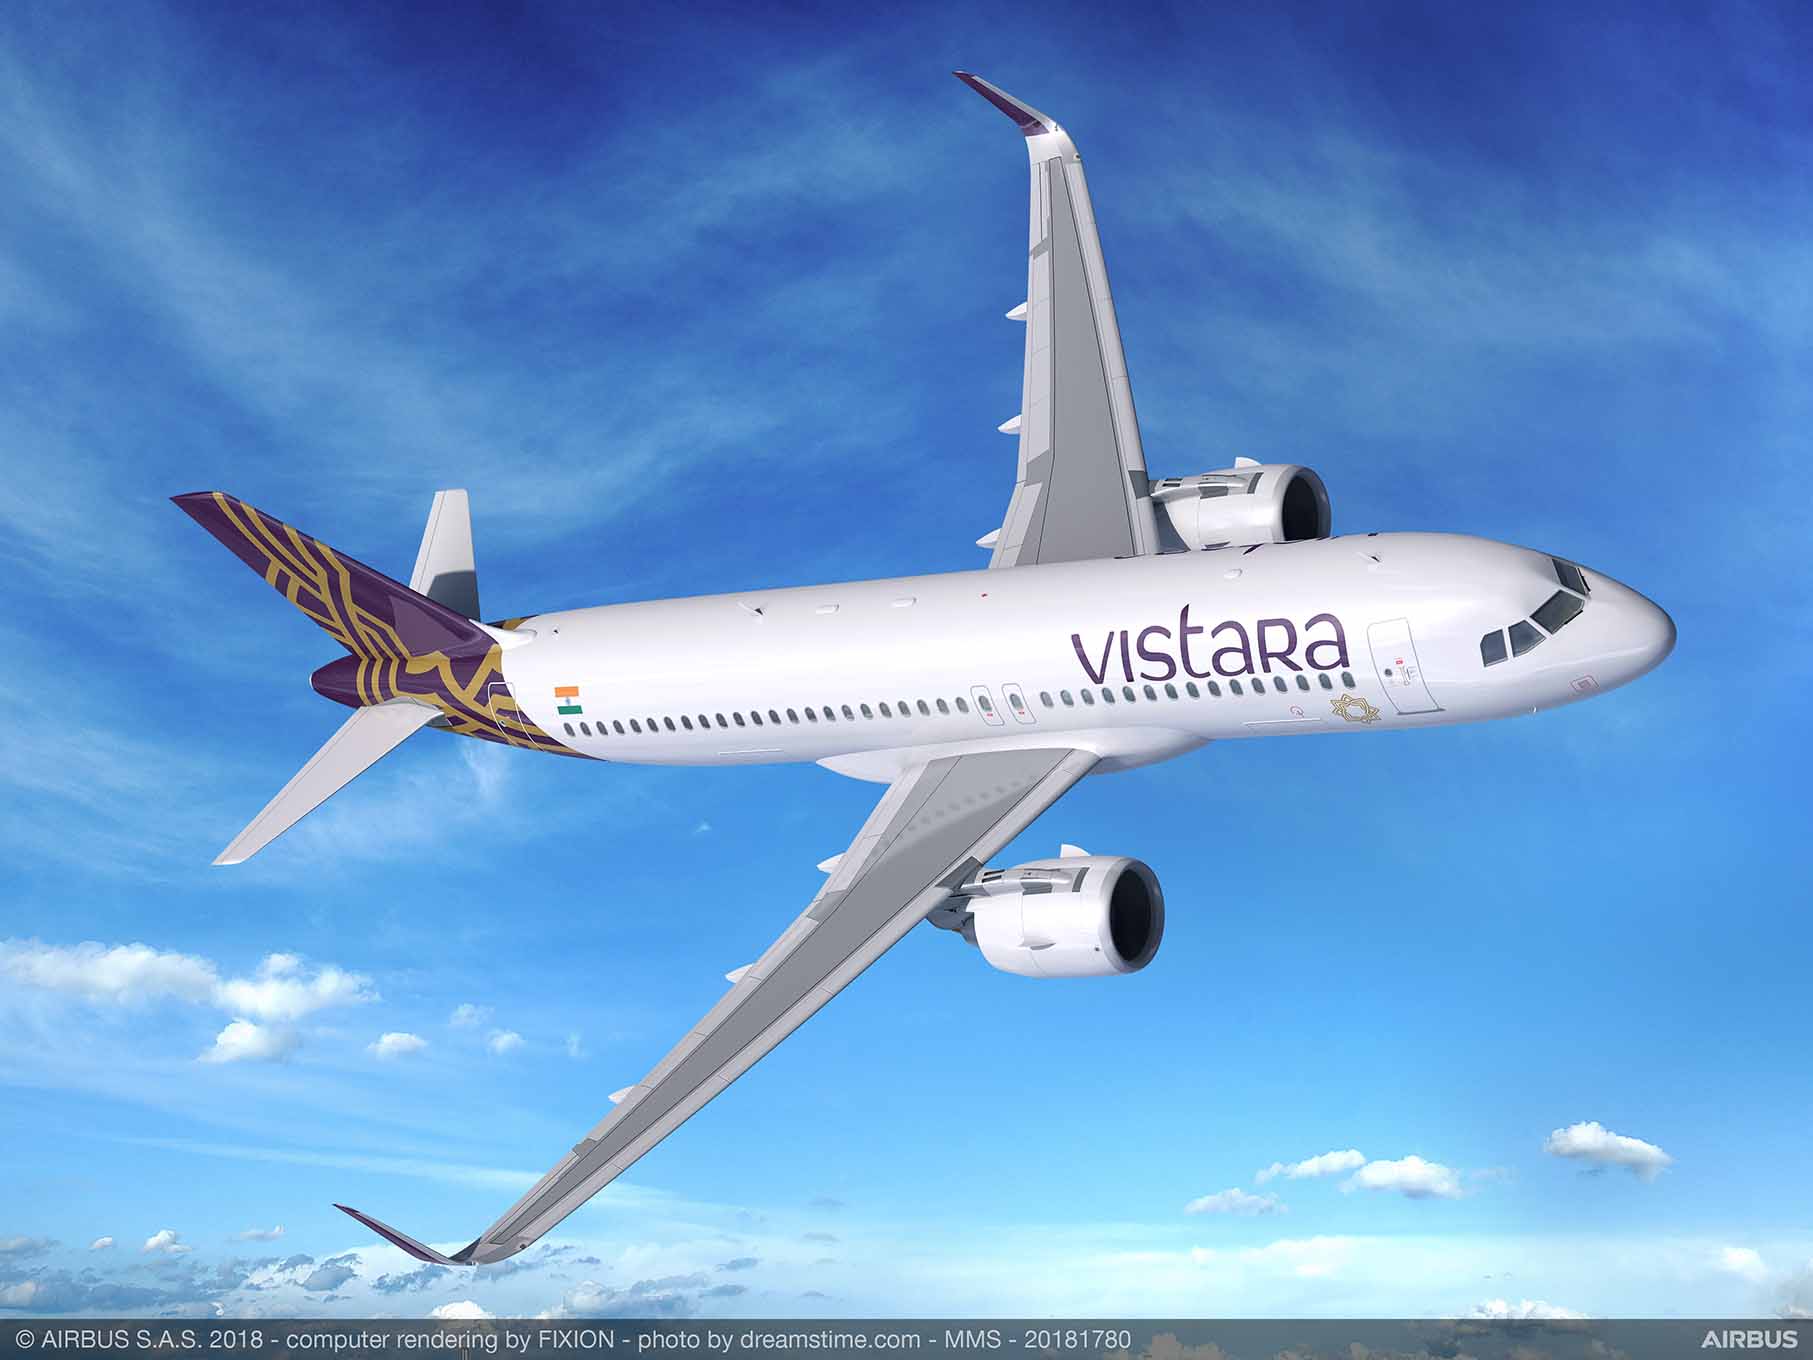 Vistara to commence operations from new Goa airport